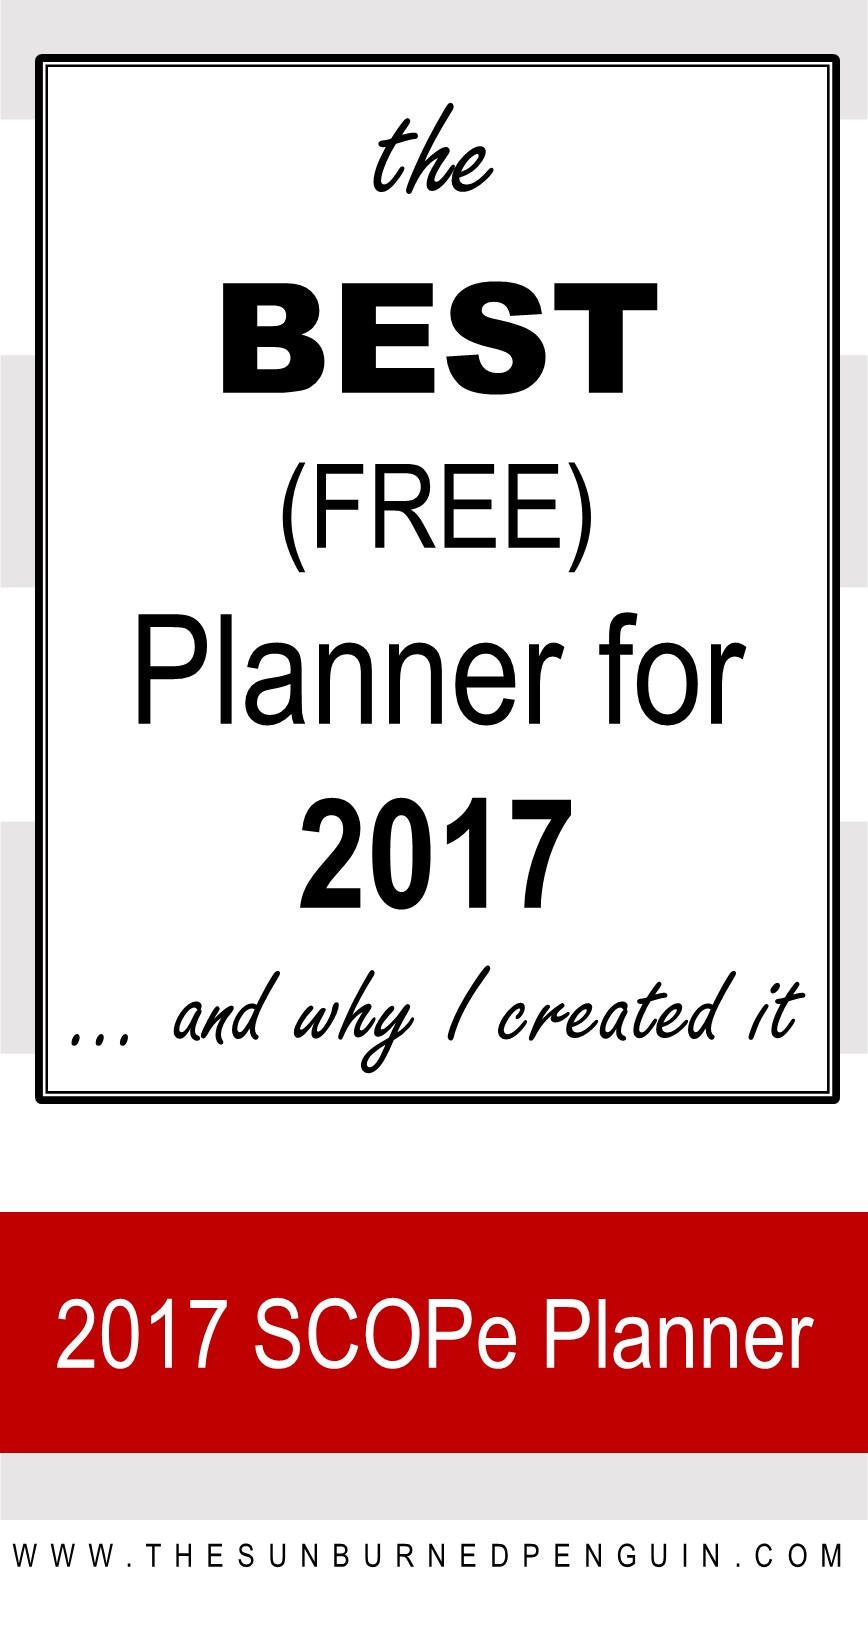 The Best Free Planner for 2017 ... and why I created it